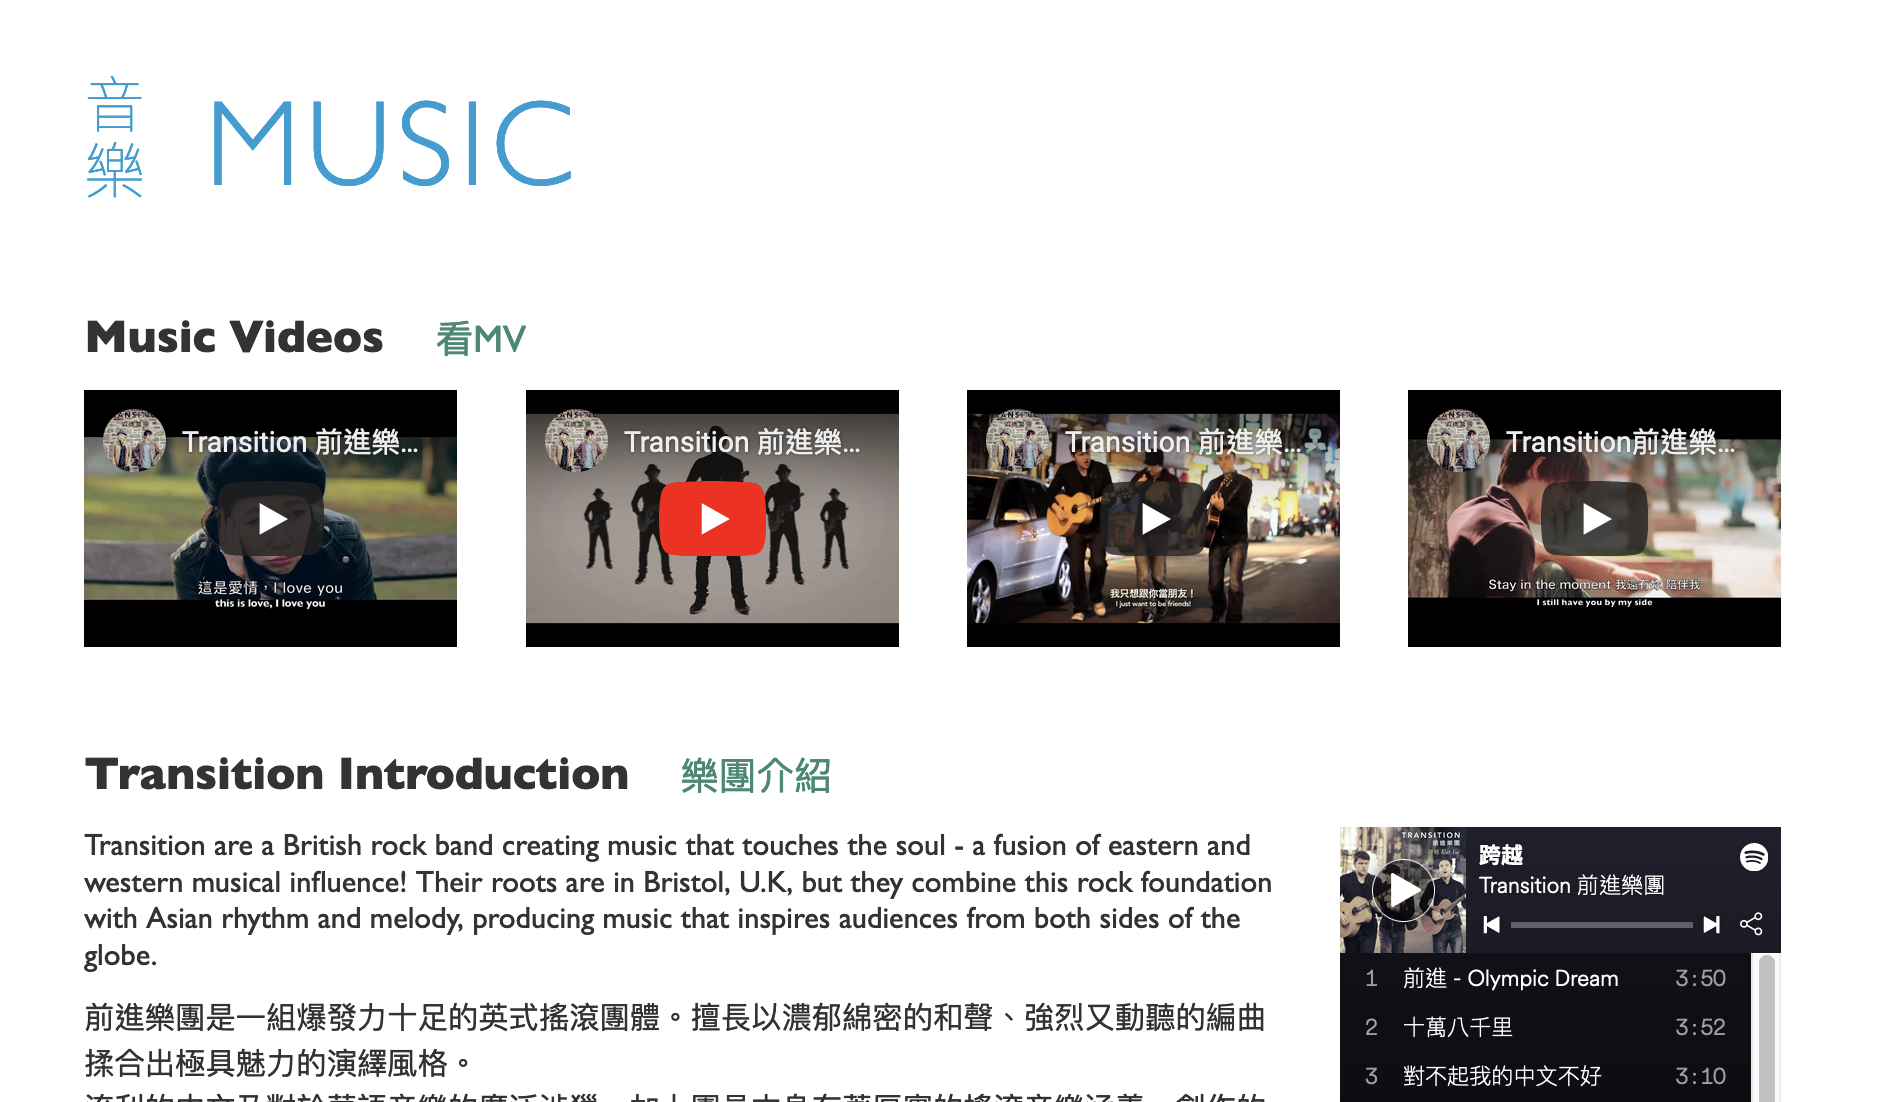 website screenshot, there is English text with Chinese text alongside of it, and links to YouTube videos